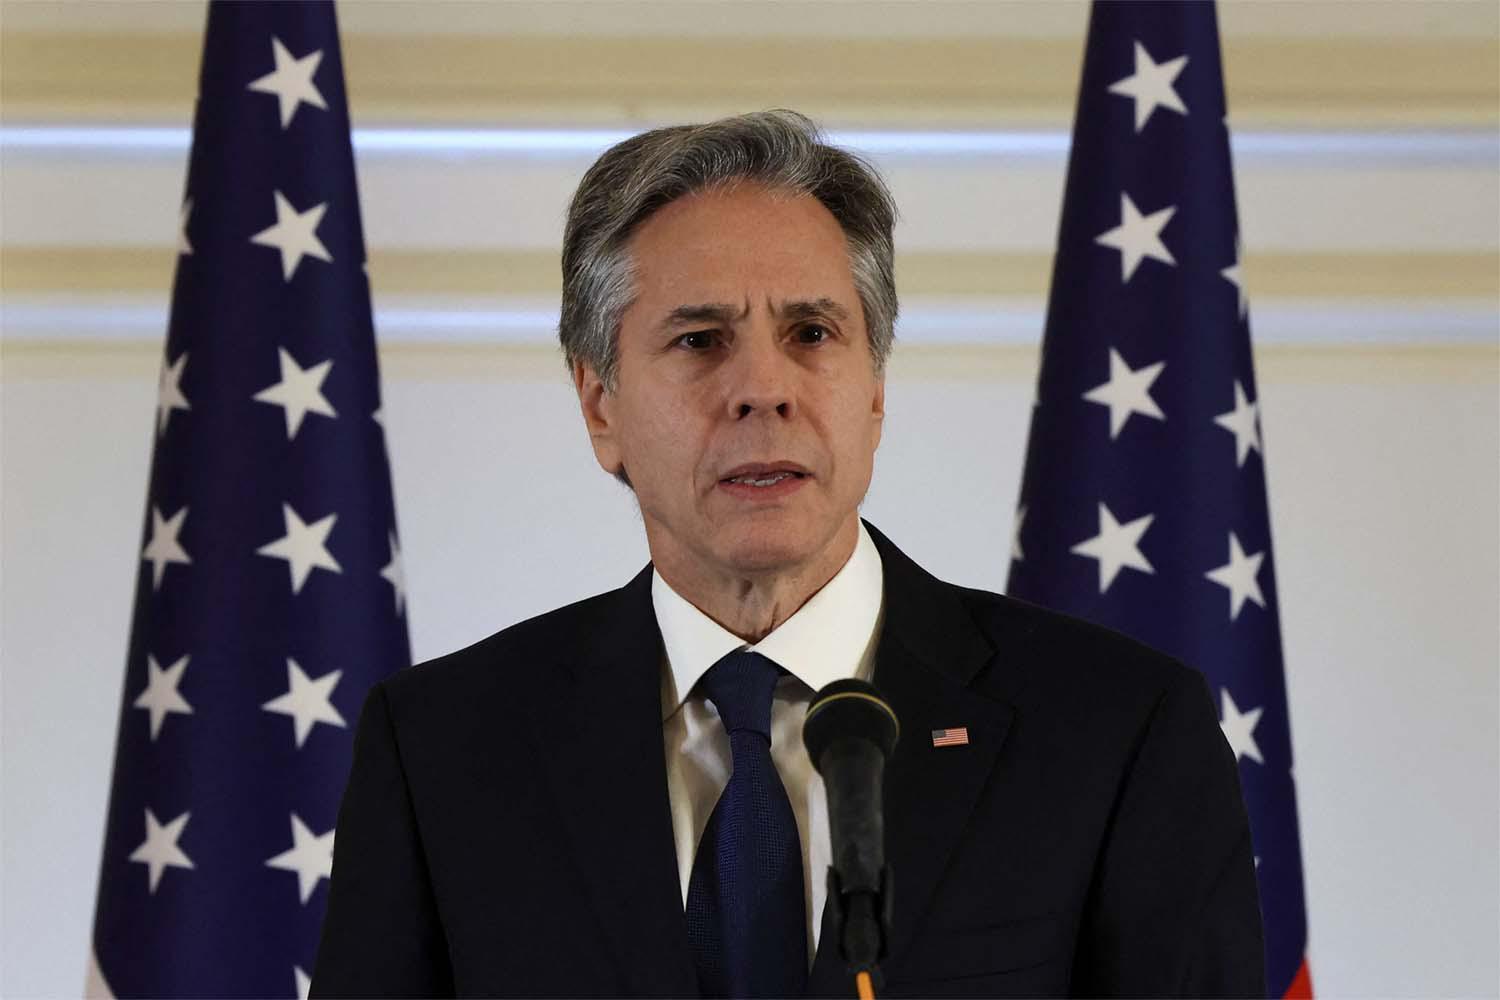 Blinken said the US would oppose “anything” that undermines hopes of a two-state solution